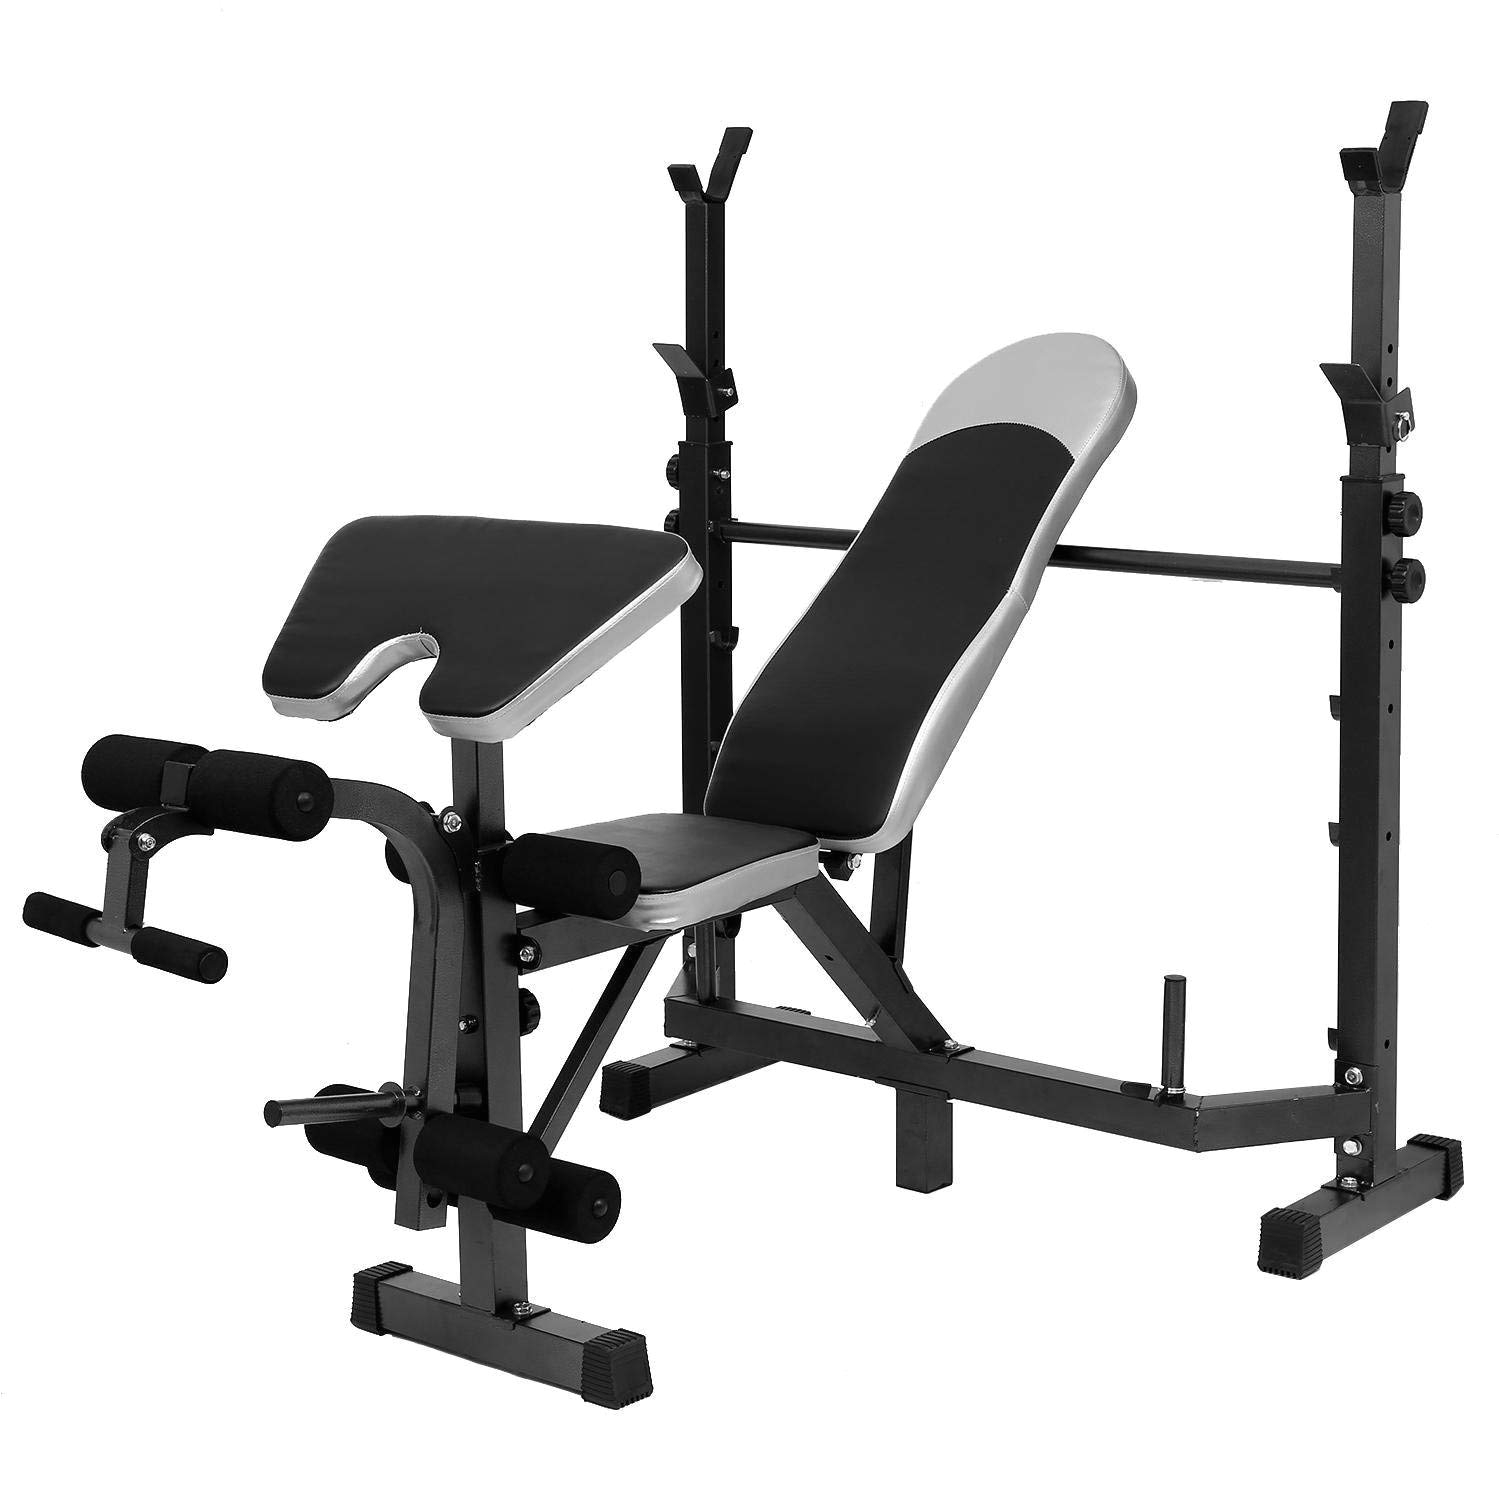 amazon com multi function olympic workout bench w adjustable squat rack robust frame bench features leg developer curl yoke preacher pad weight